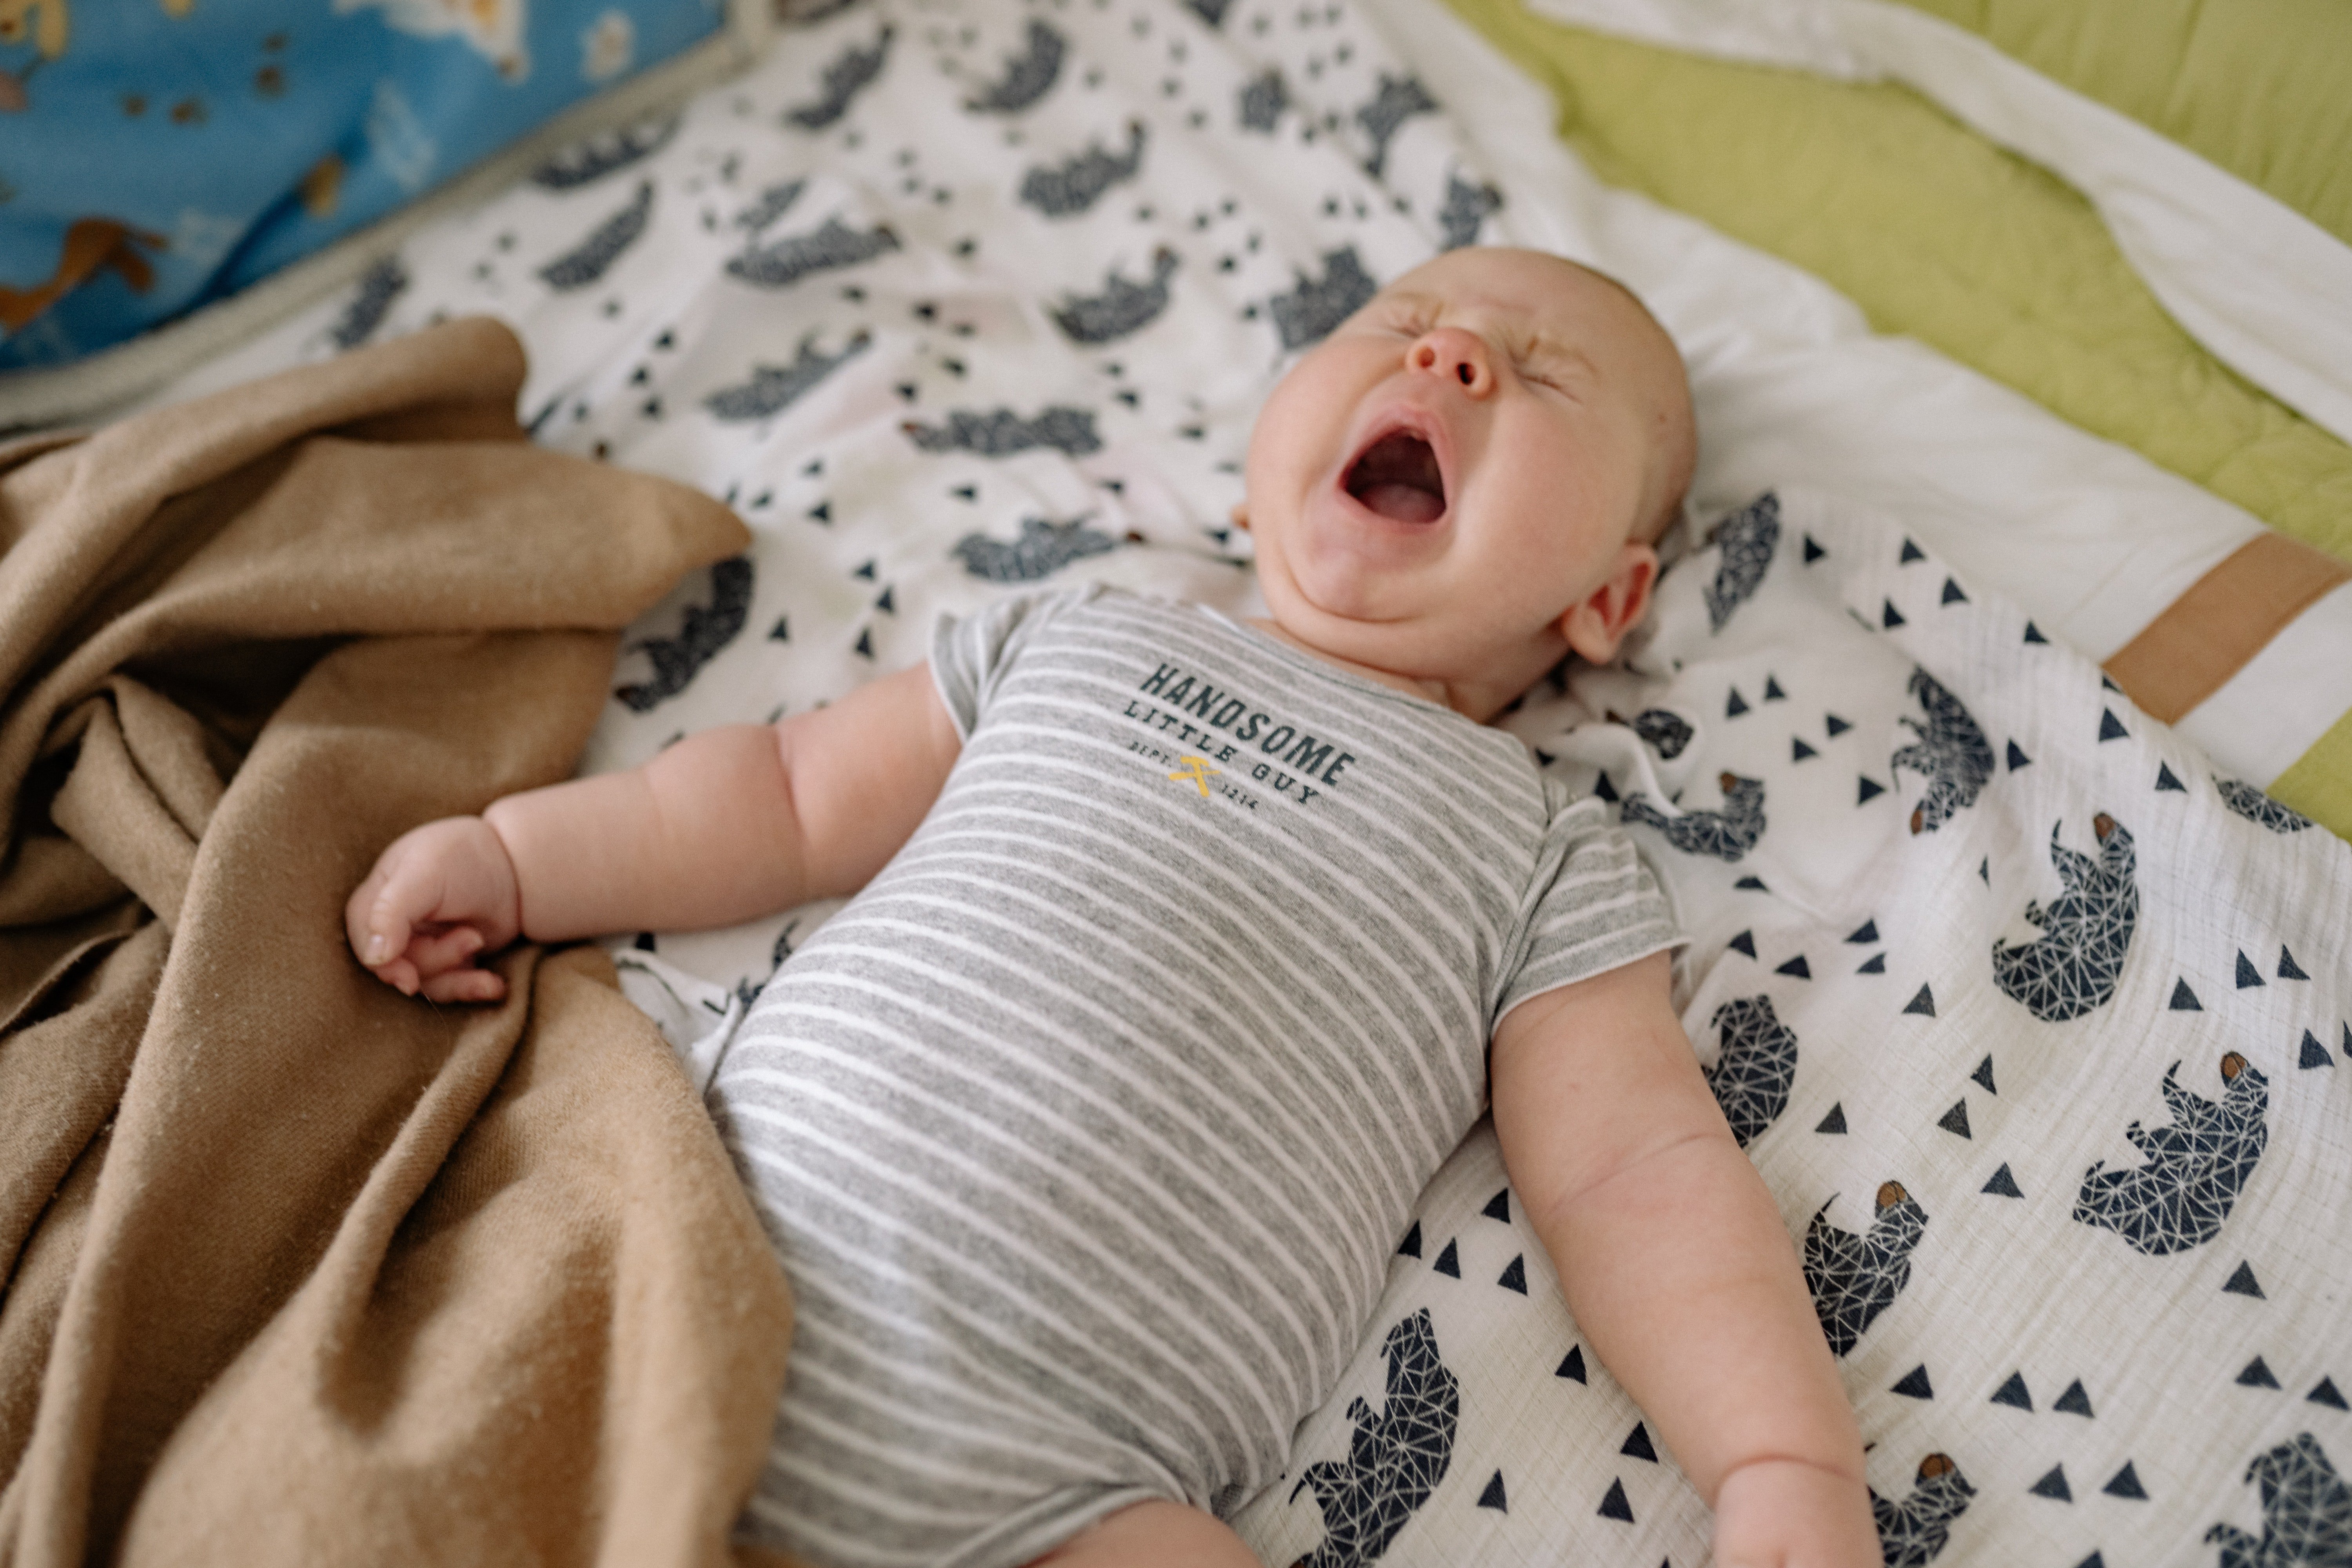 Her infant son, Pete, woke up in the middle of the night, hungry for food. | Source: Pexels